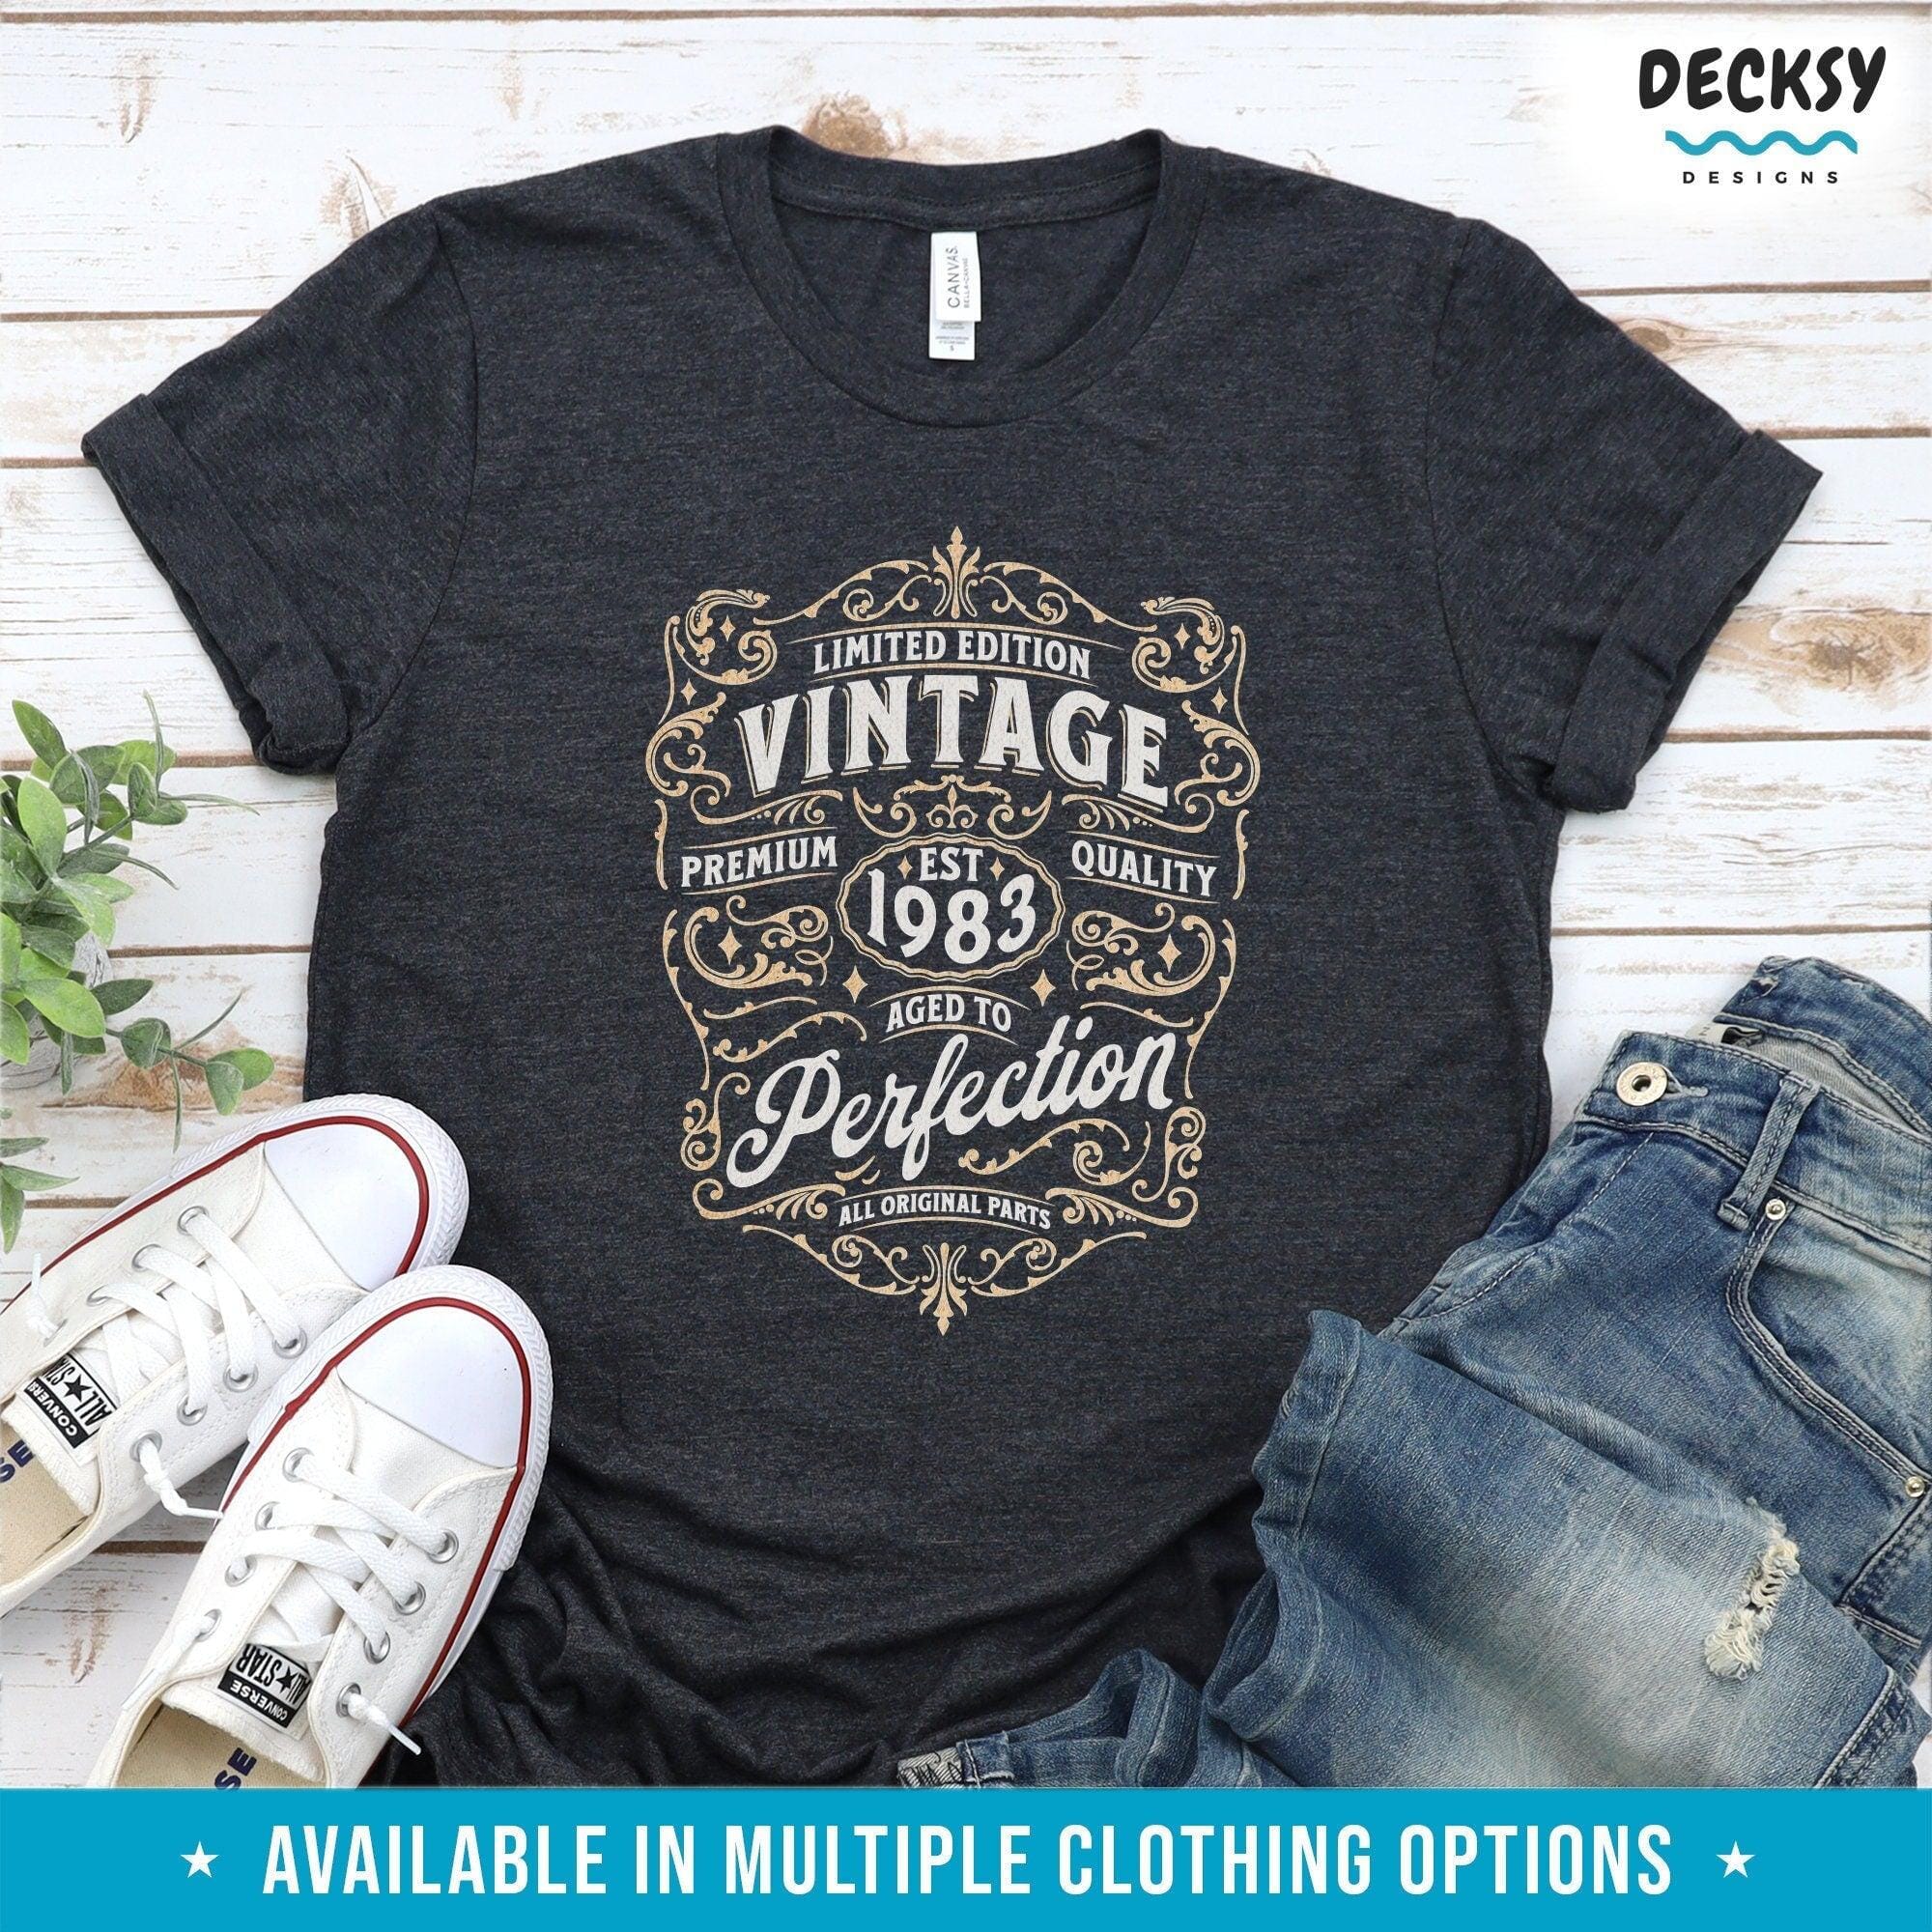 40th Birthday Shirt, Born In 1983 Gift, Vintage Retro Style 1983 Tee-Clothing:Gender-Neutral Adult Clothing:Tops & Tees:T-shirts:Graphic Tees-DecksyDesigns